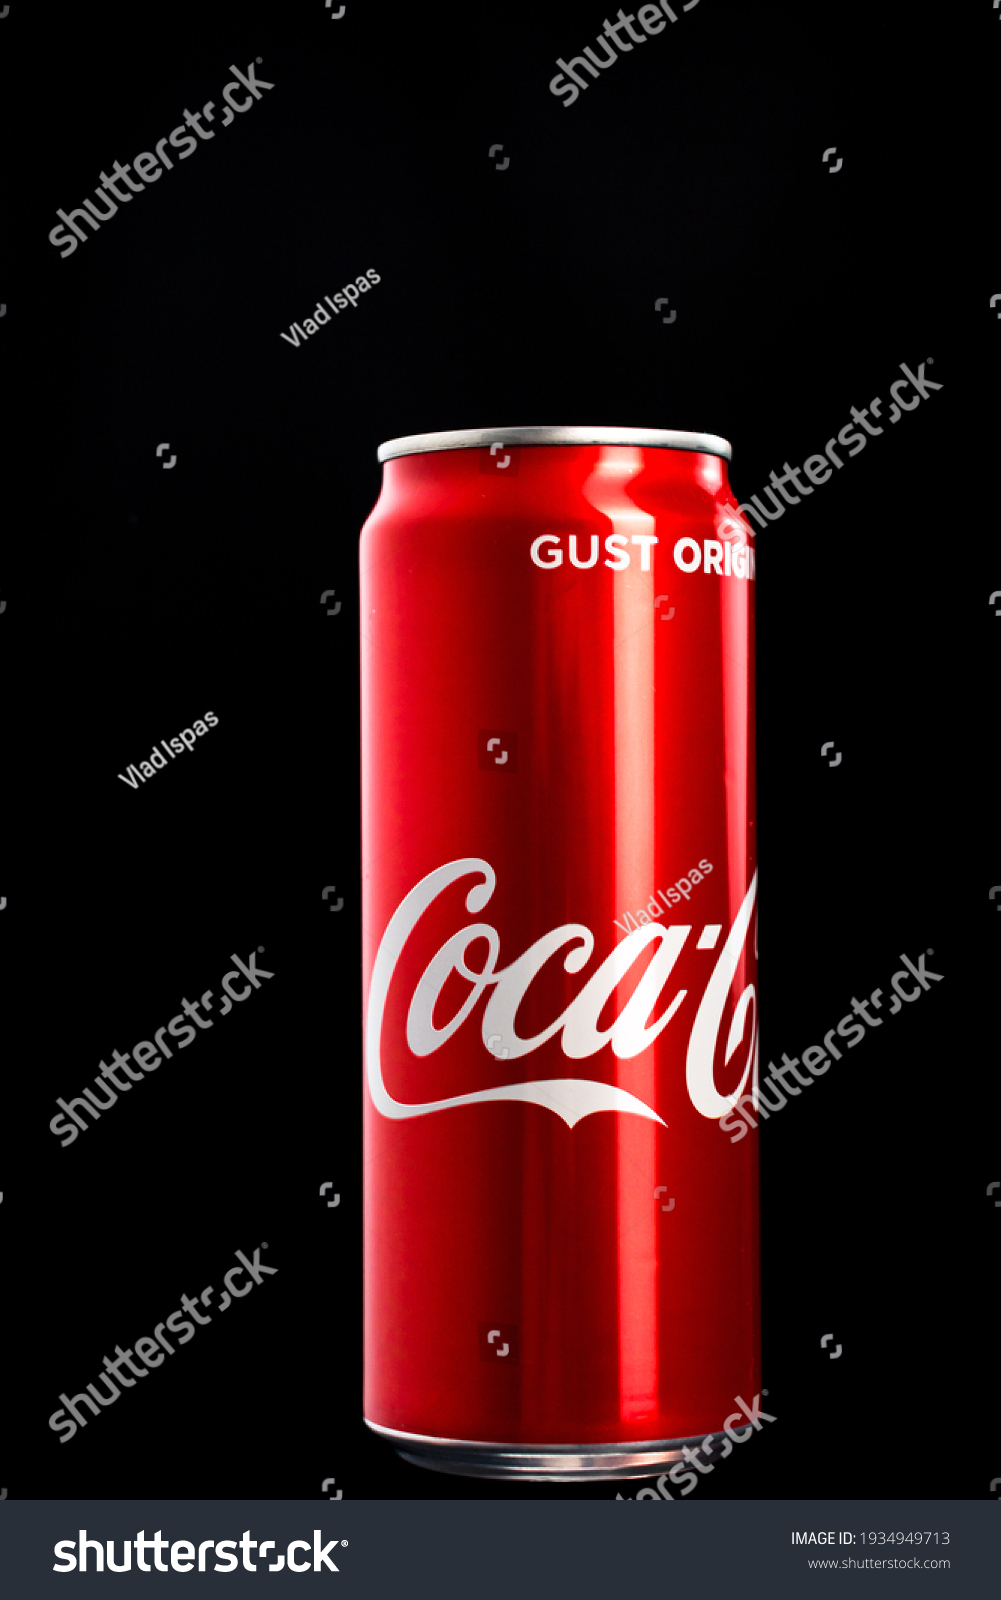 Editorial Photo Classic Cocacola Can On Stock Photo 1934949713 ...